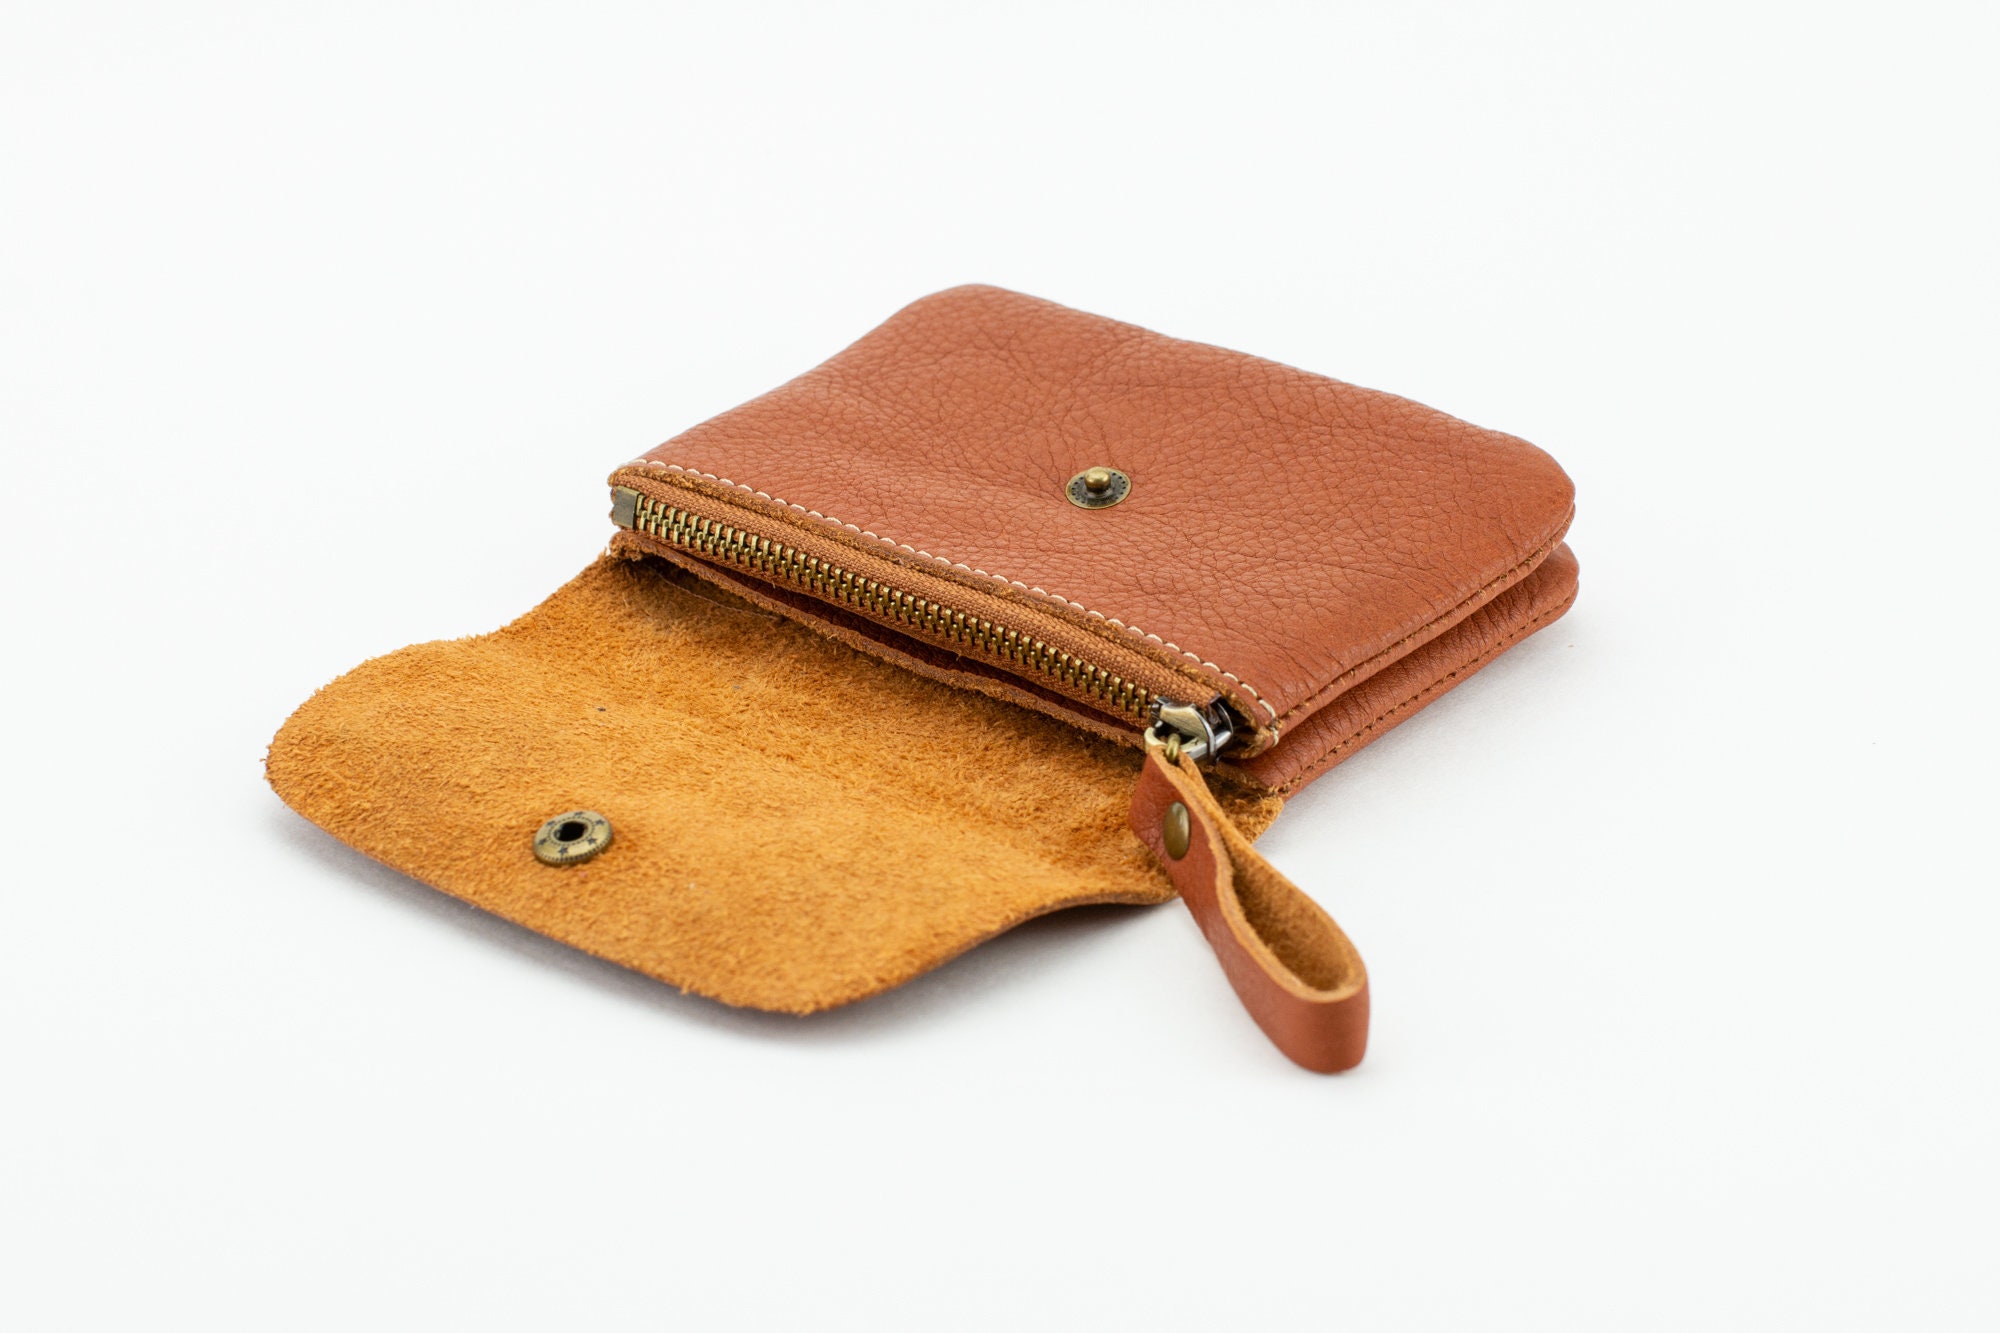 Minimalist Leather Wallet - Classic Brown, Stitchless Cardholder, Coin  Purse, Italian Premium Quality, Vintage Unisex Pouch, Gift for Men/Women,  Slim